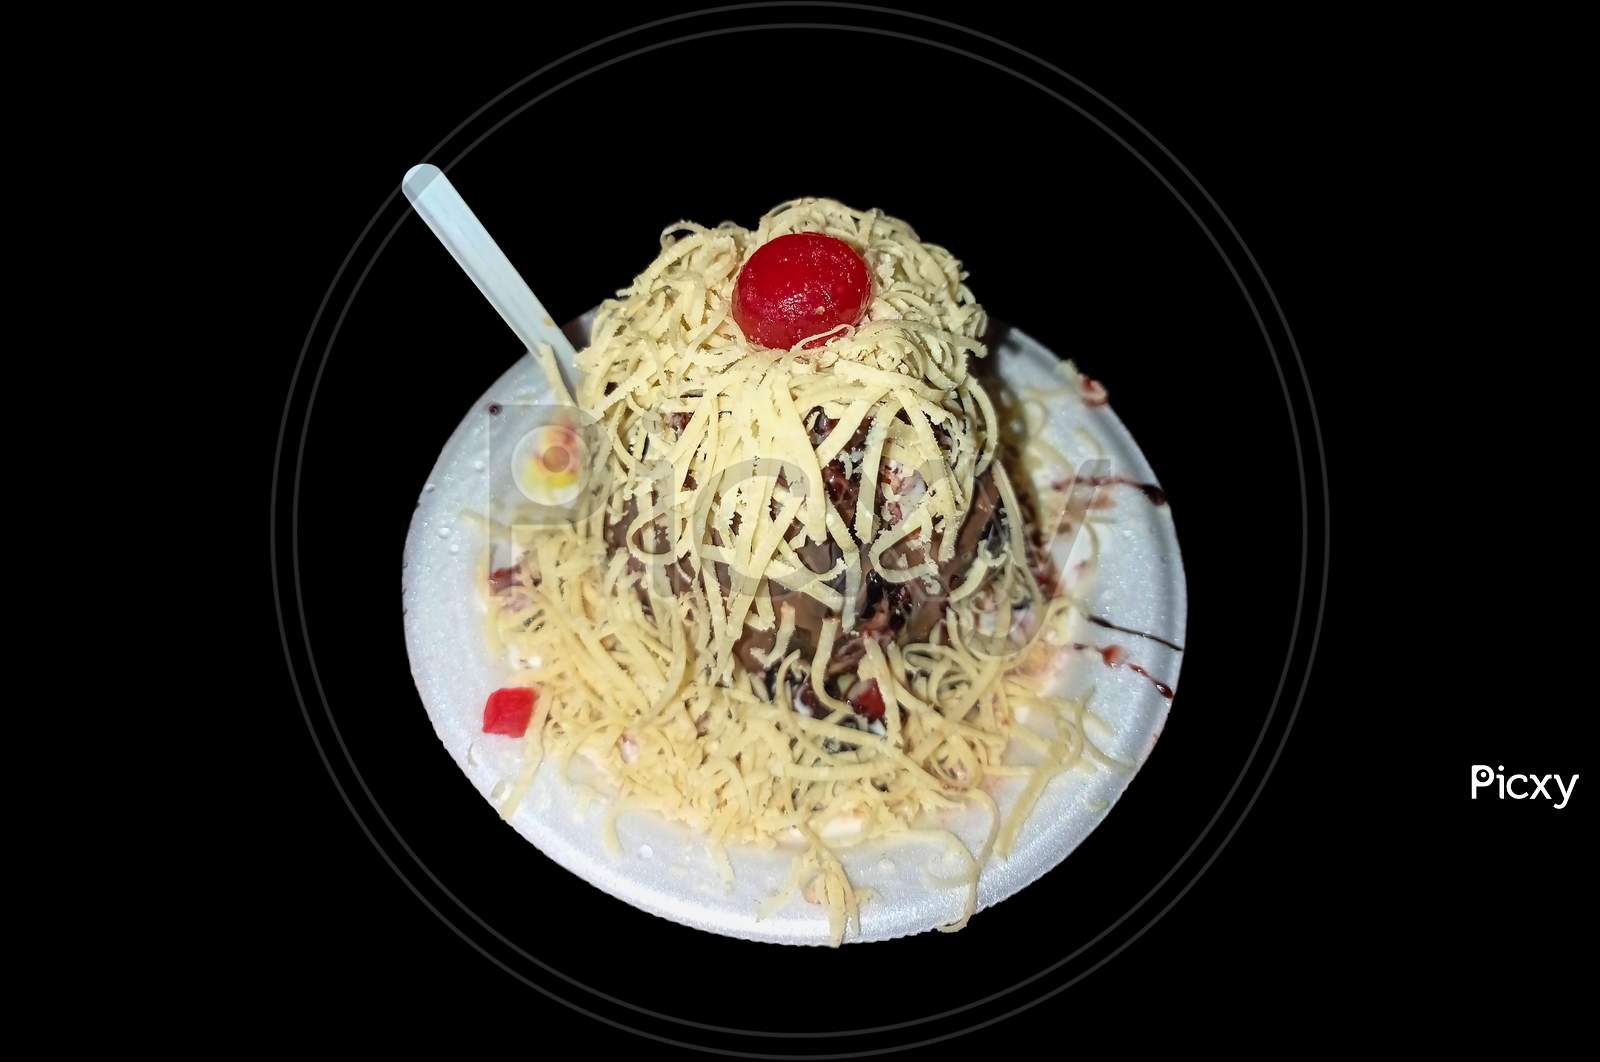 Indian Ice Gola dish in black background.